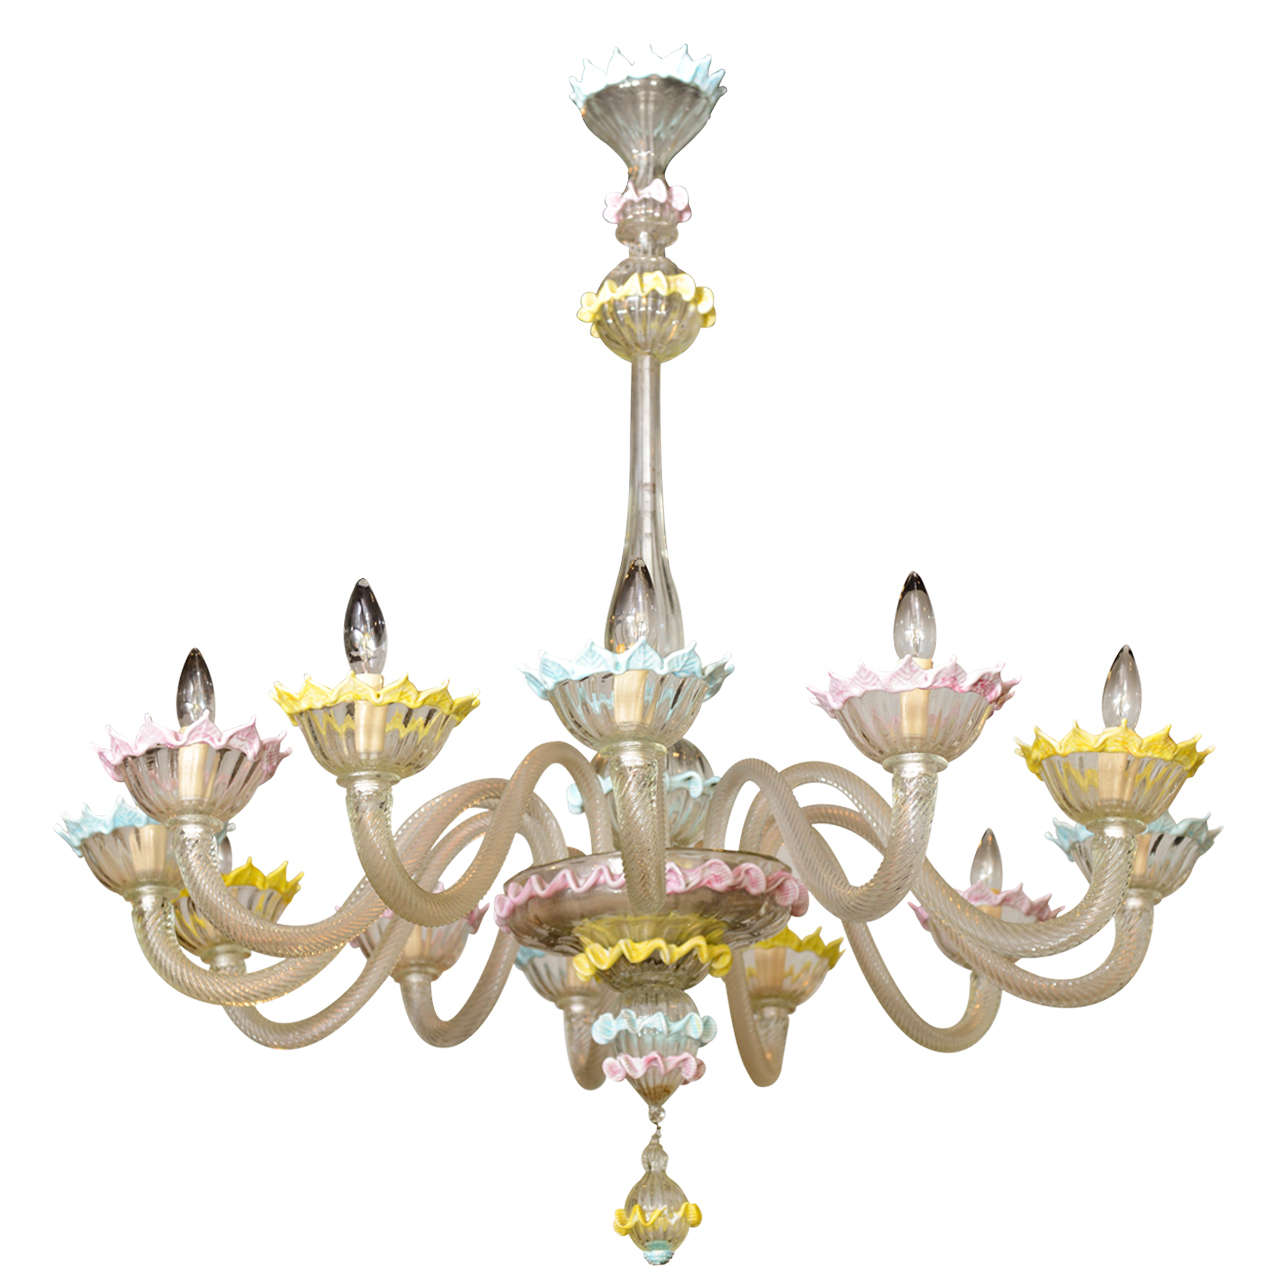 Fine Pair of Barovier & Toso Clear and Colored Glass 12-Light Chandeliers, 1940s For Sale